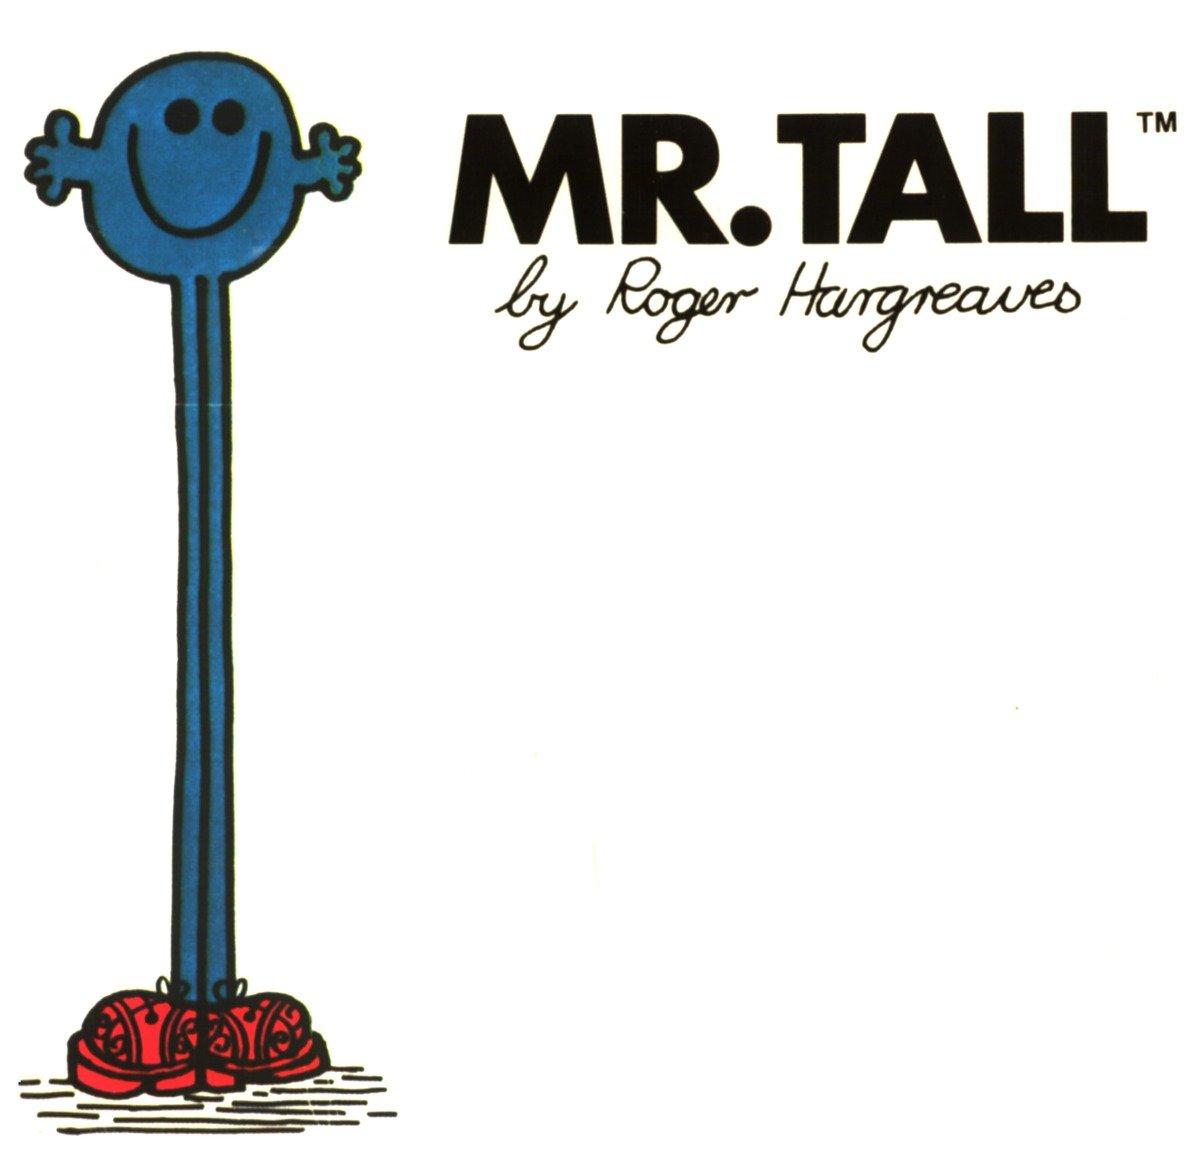 Mr. Tall / Roger Hargreaves / Taschenbuch / Englisch / 1999 / Penguin Young Readers Group / EAN 9780843175103 - Hargreaves, Roger